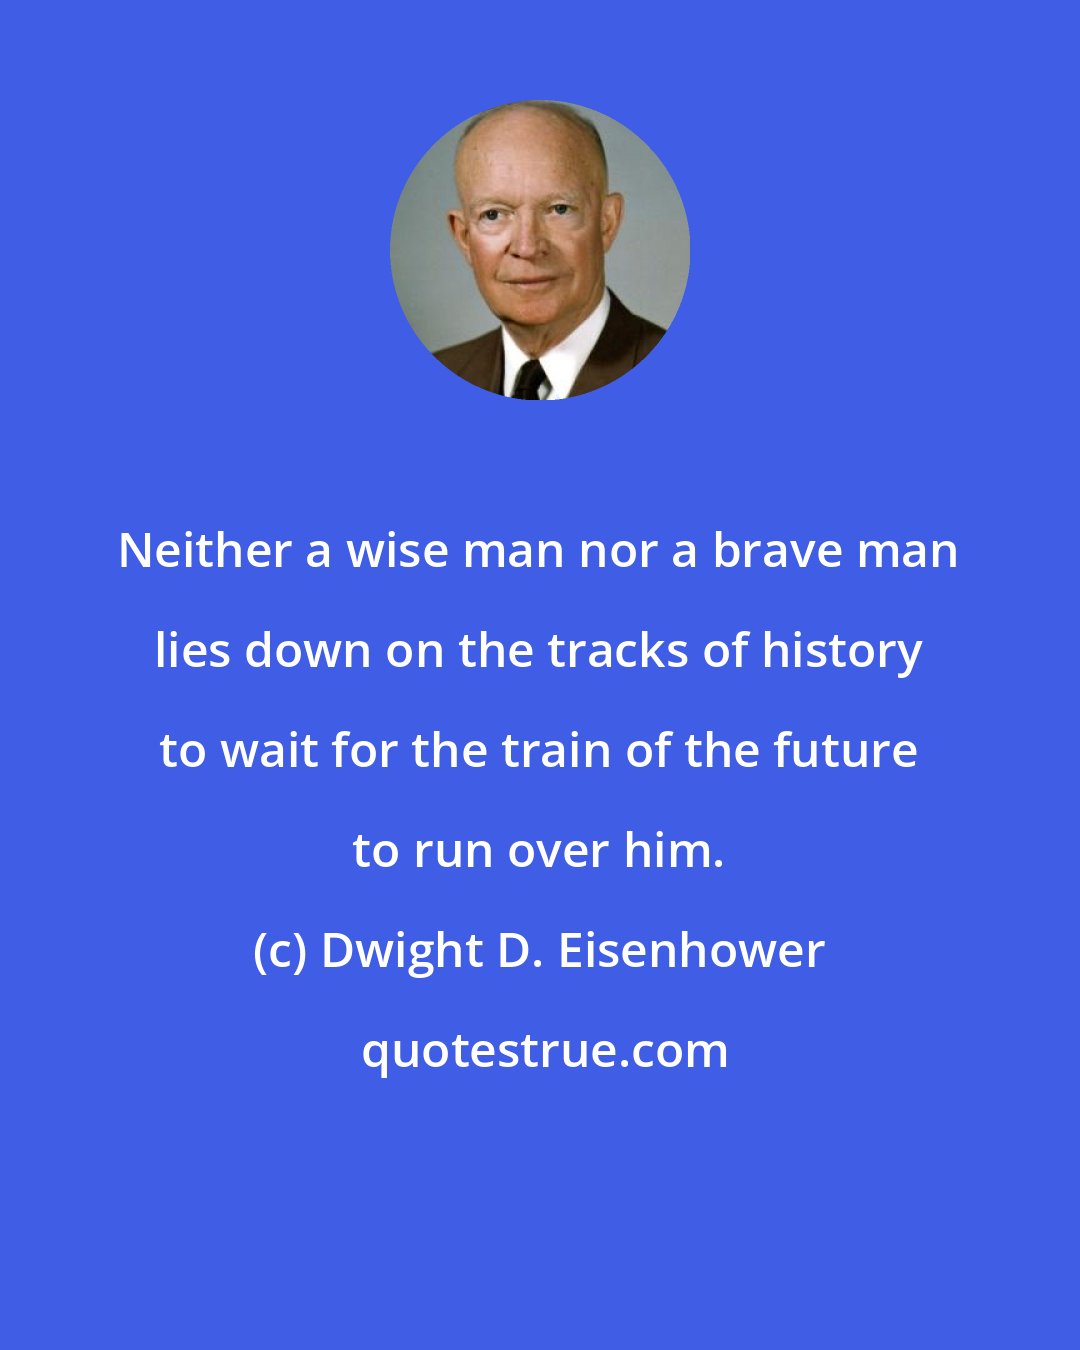 Dwight D. Eisenhower: Neither a wise man nor a brave man lies down on the tracks of history to wait for the train of the future to run over him.